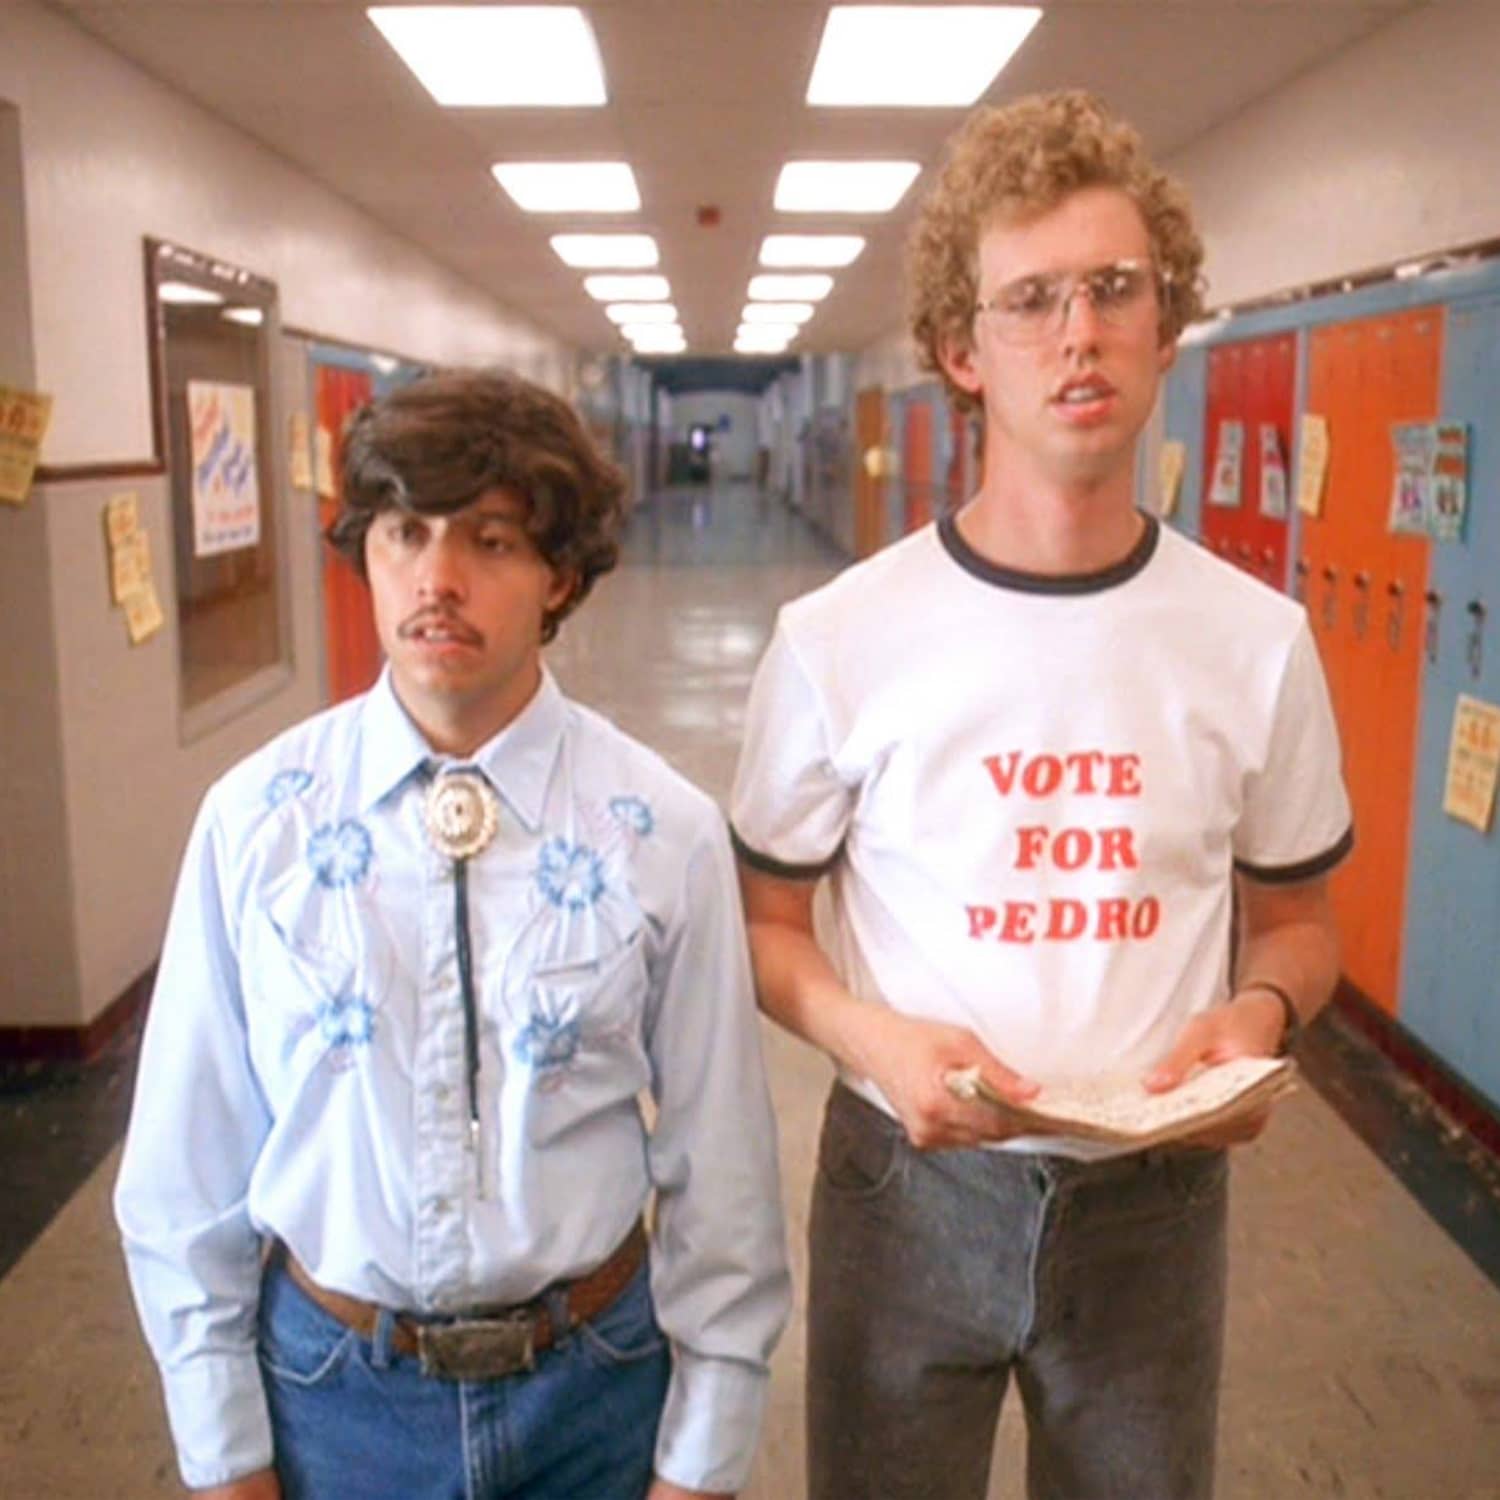 A Complete Analysis of All the Interior Design Featured in “Napoleon Dynamite”